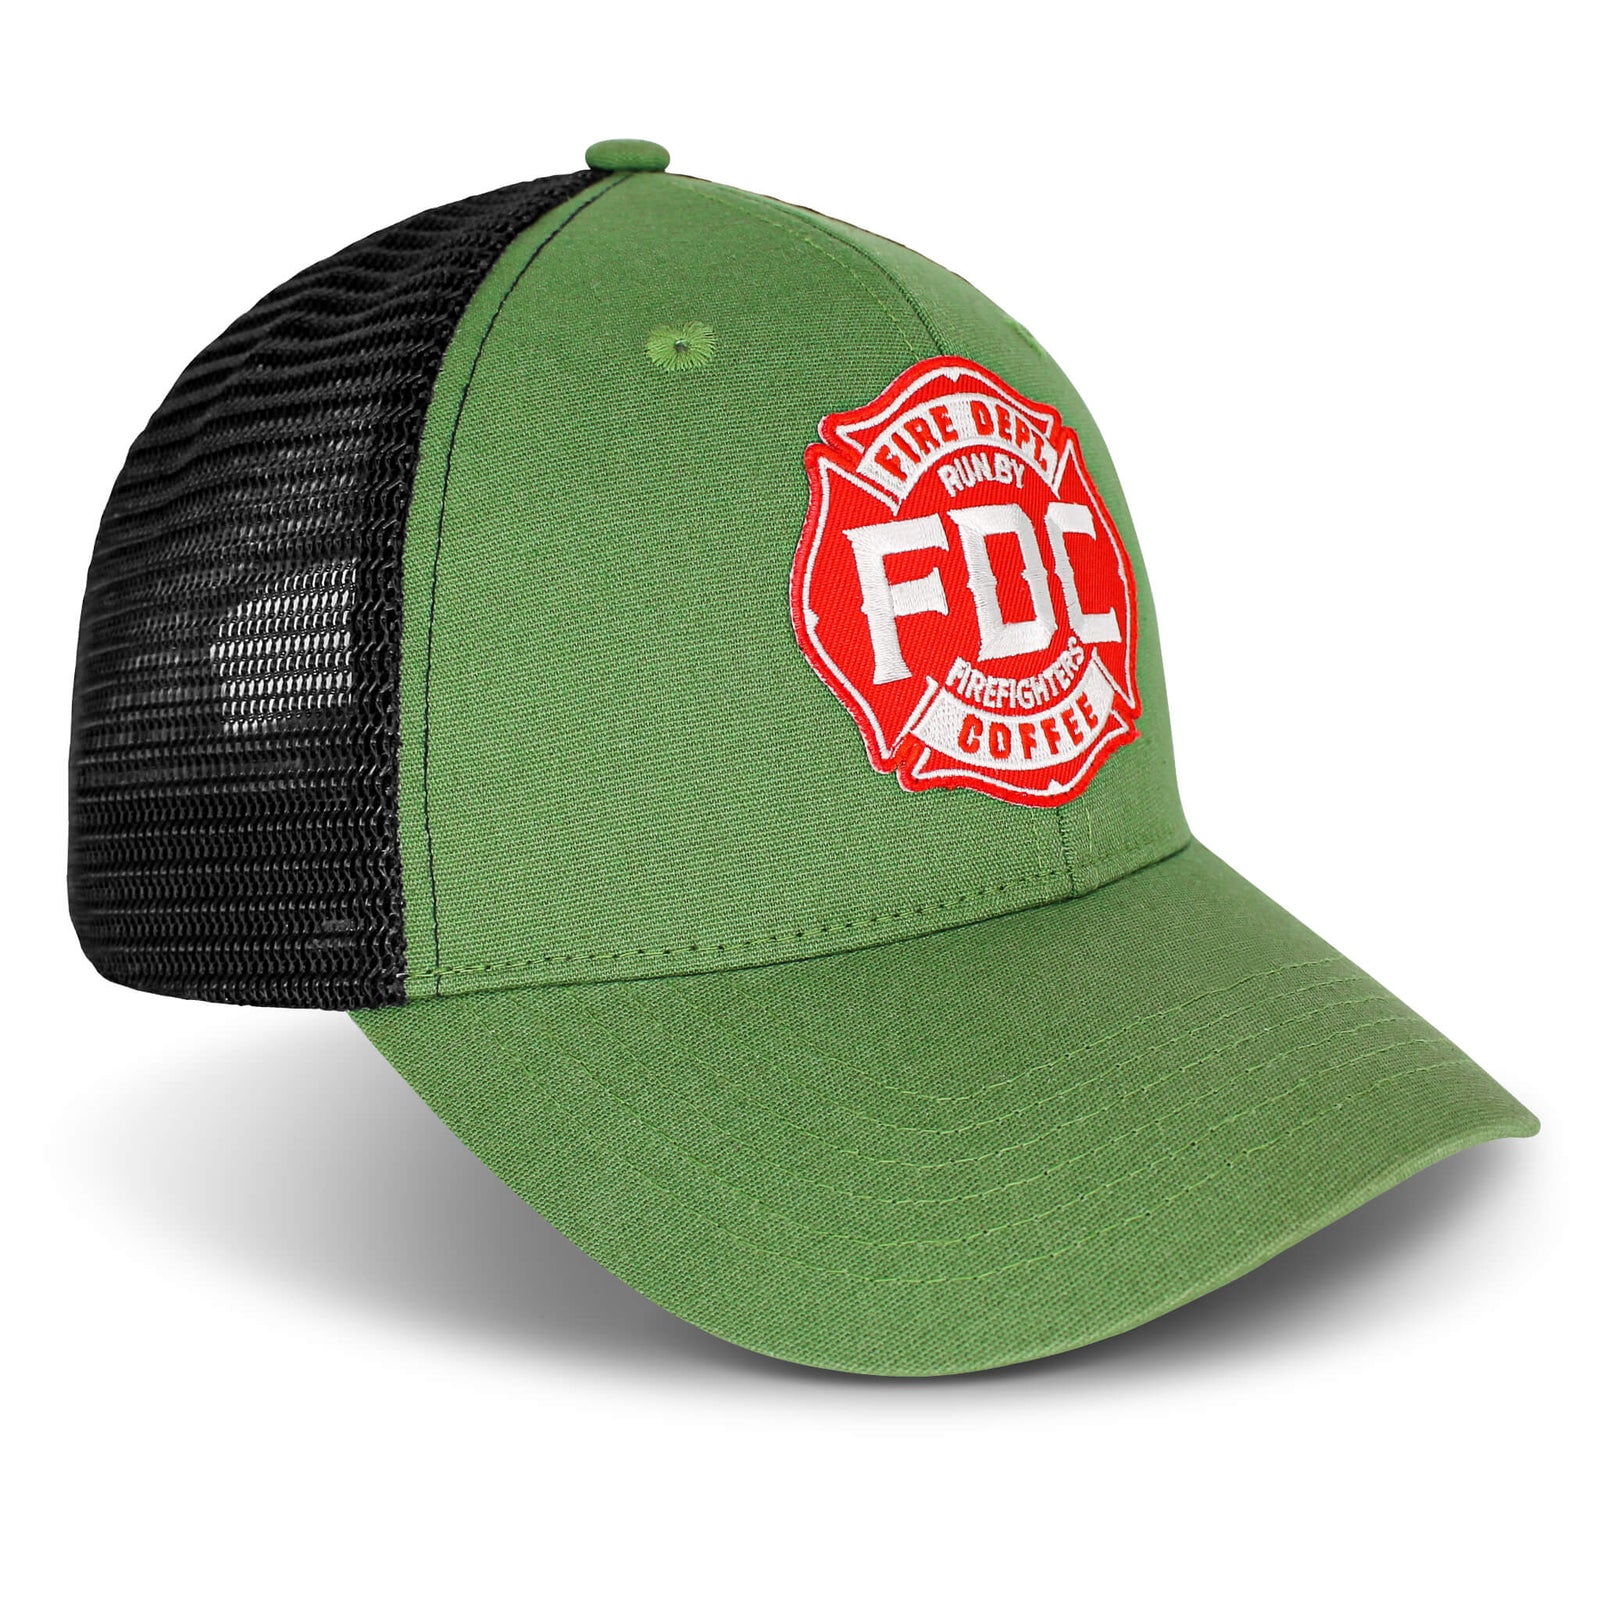 A 3/4 angle image of the FDC Green Hat featuring a green camo design with a red FDC Maltese cross logo on the front.